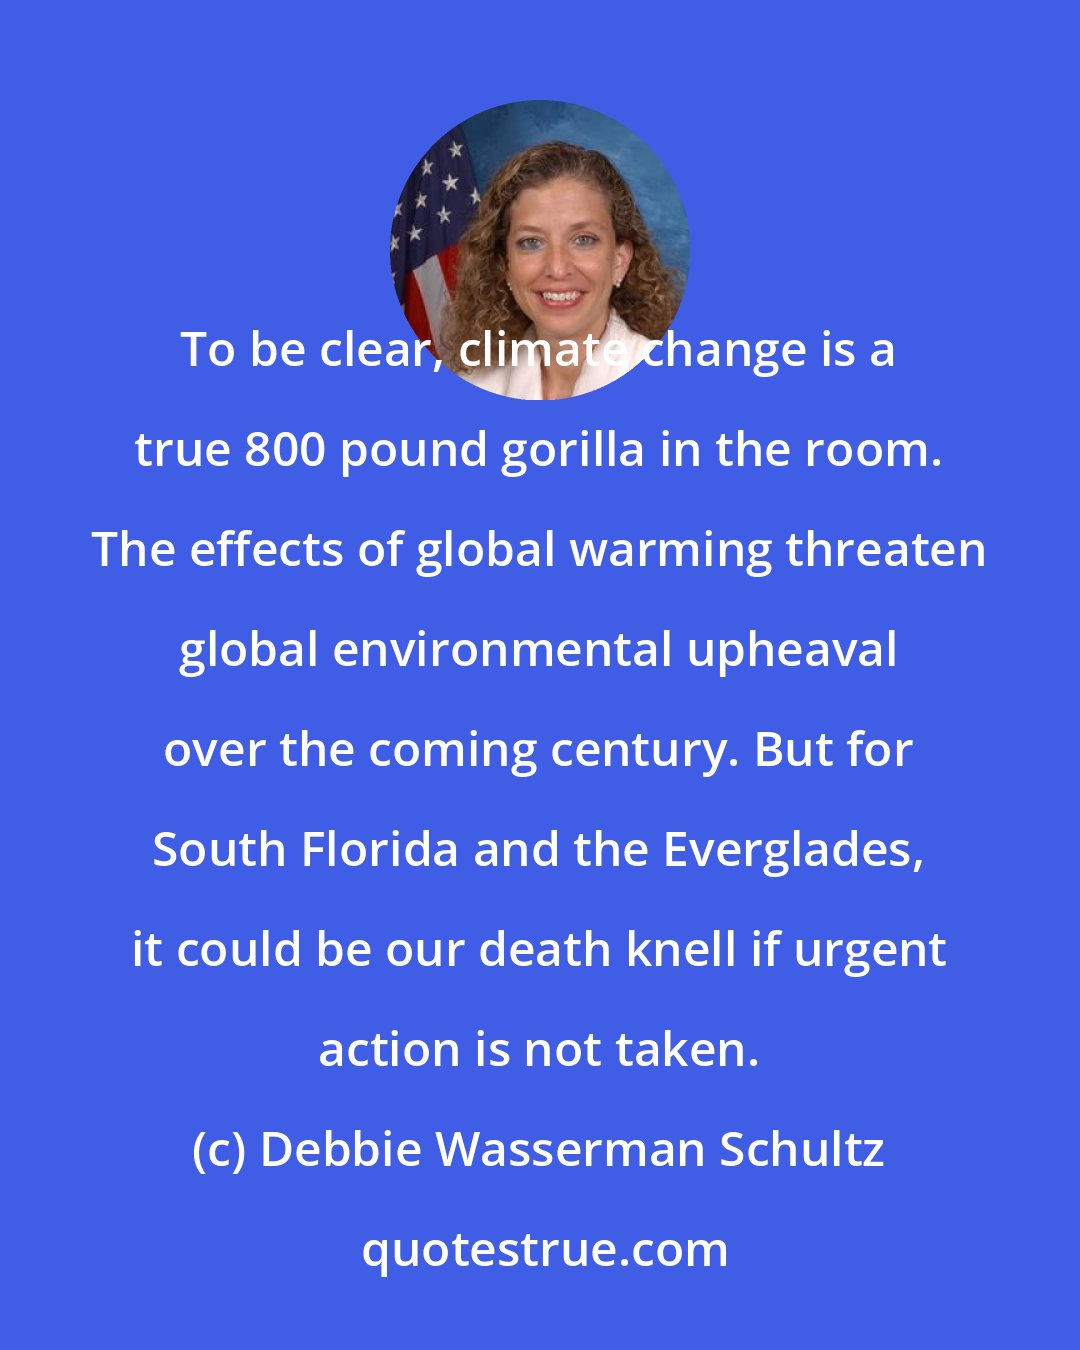 Debbie Wasserman Schultz: To be clear, climate change is a true 800 pound gorilla in the room. The effects of global warming threaten global environmental upheaval over the coming century. But for South Florida and the Everglades, it could be our death knell if urgent action is not taken.